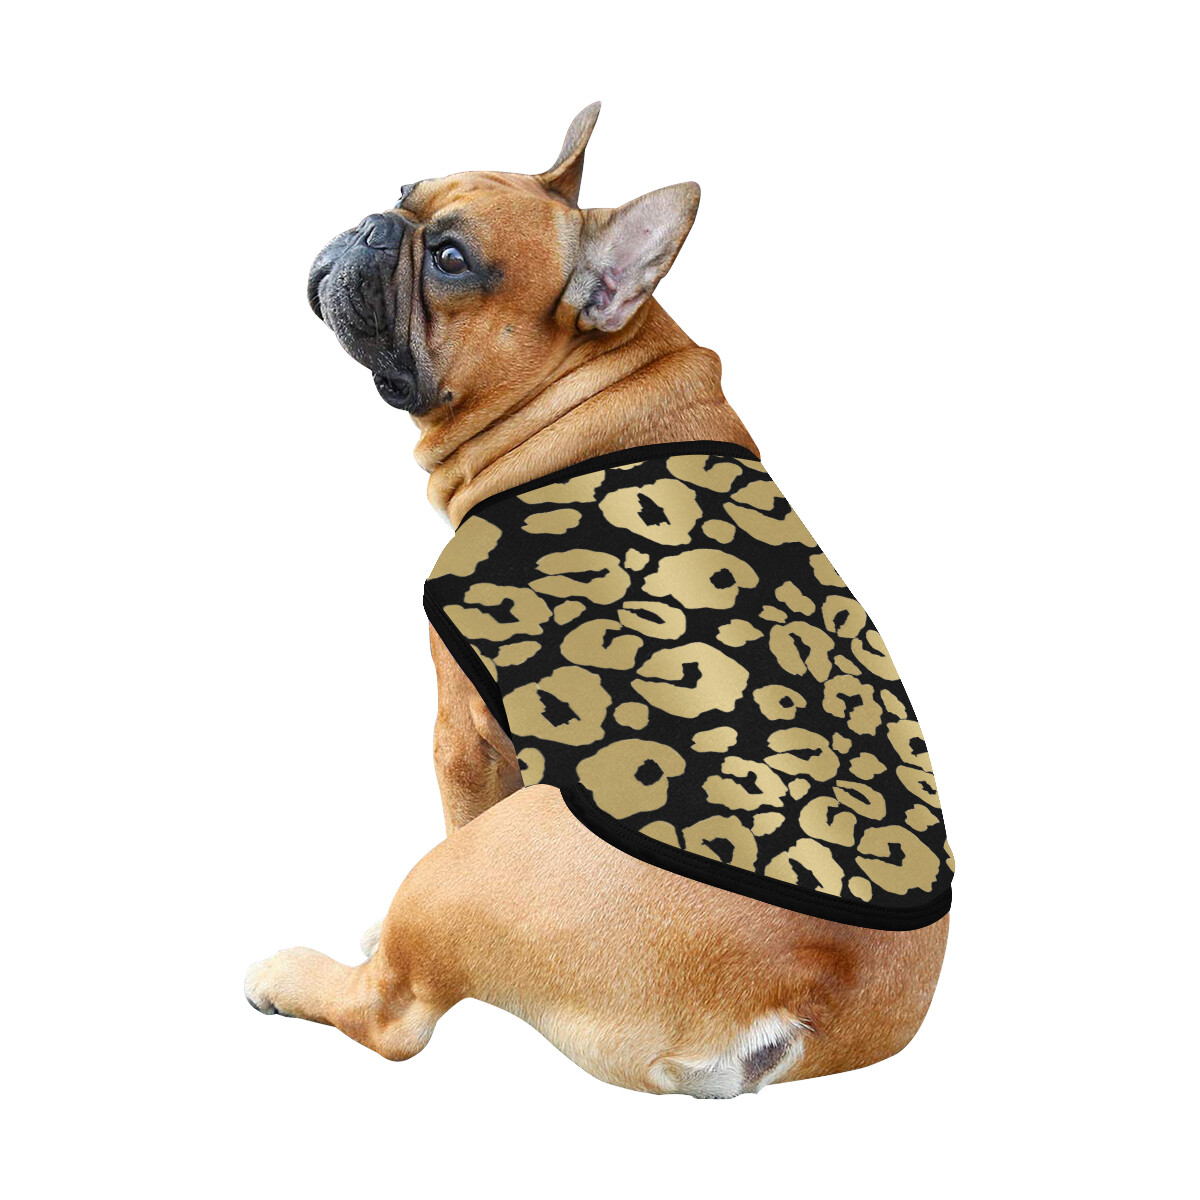 🐕 Leopard print Dog shirt, Dog Tank Top, Dog t-shirt, Dog clothes, Gifts, front back print, 7 sizes XS to 3XL, dog gifts, gold and black